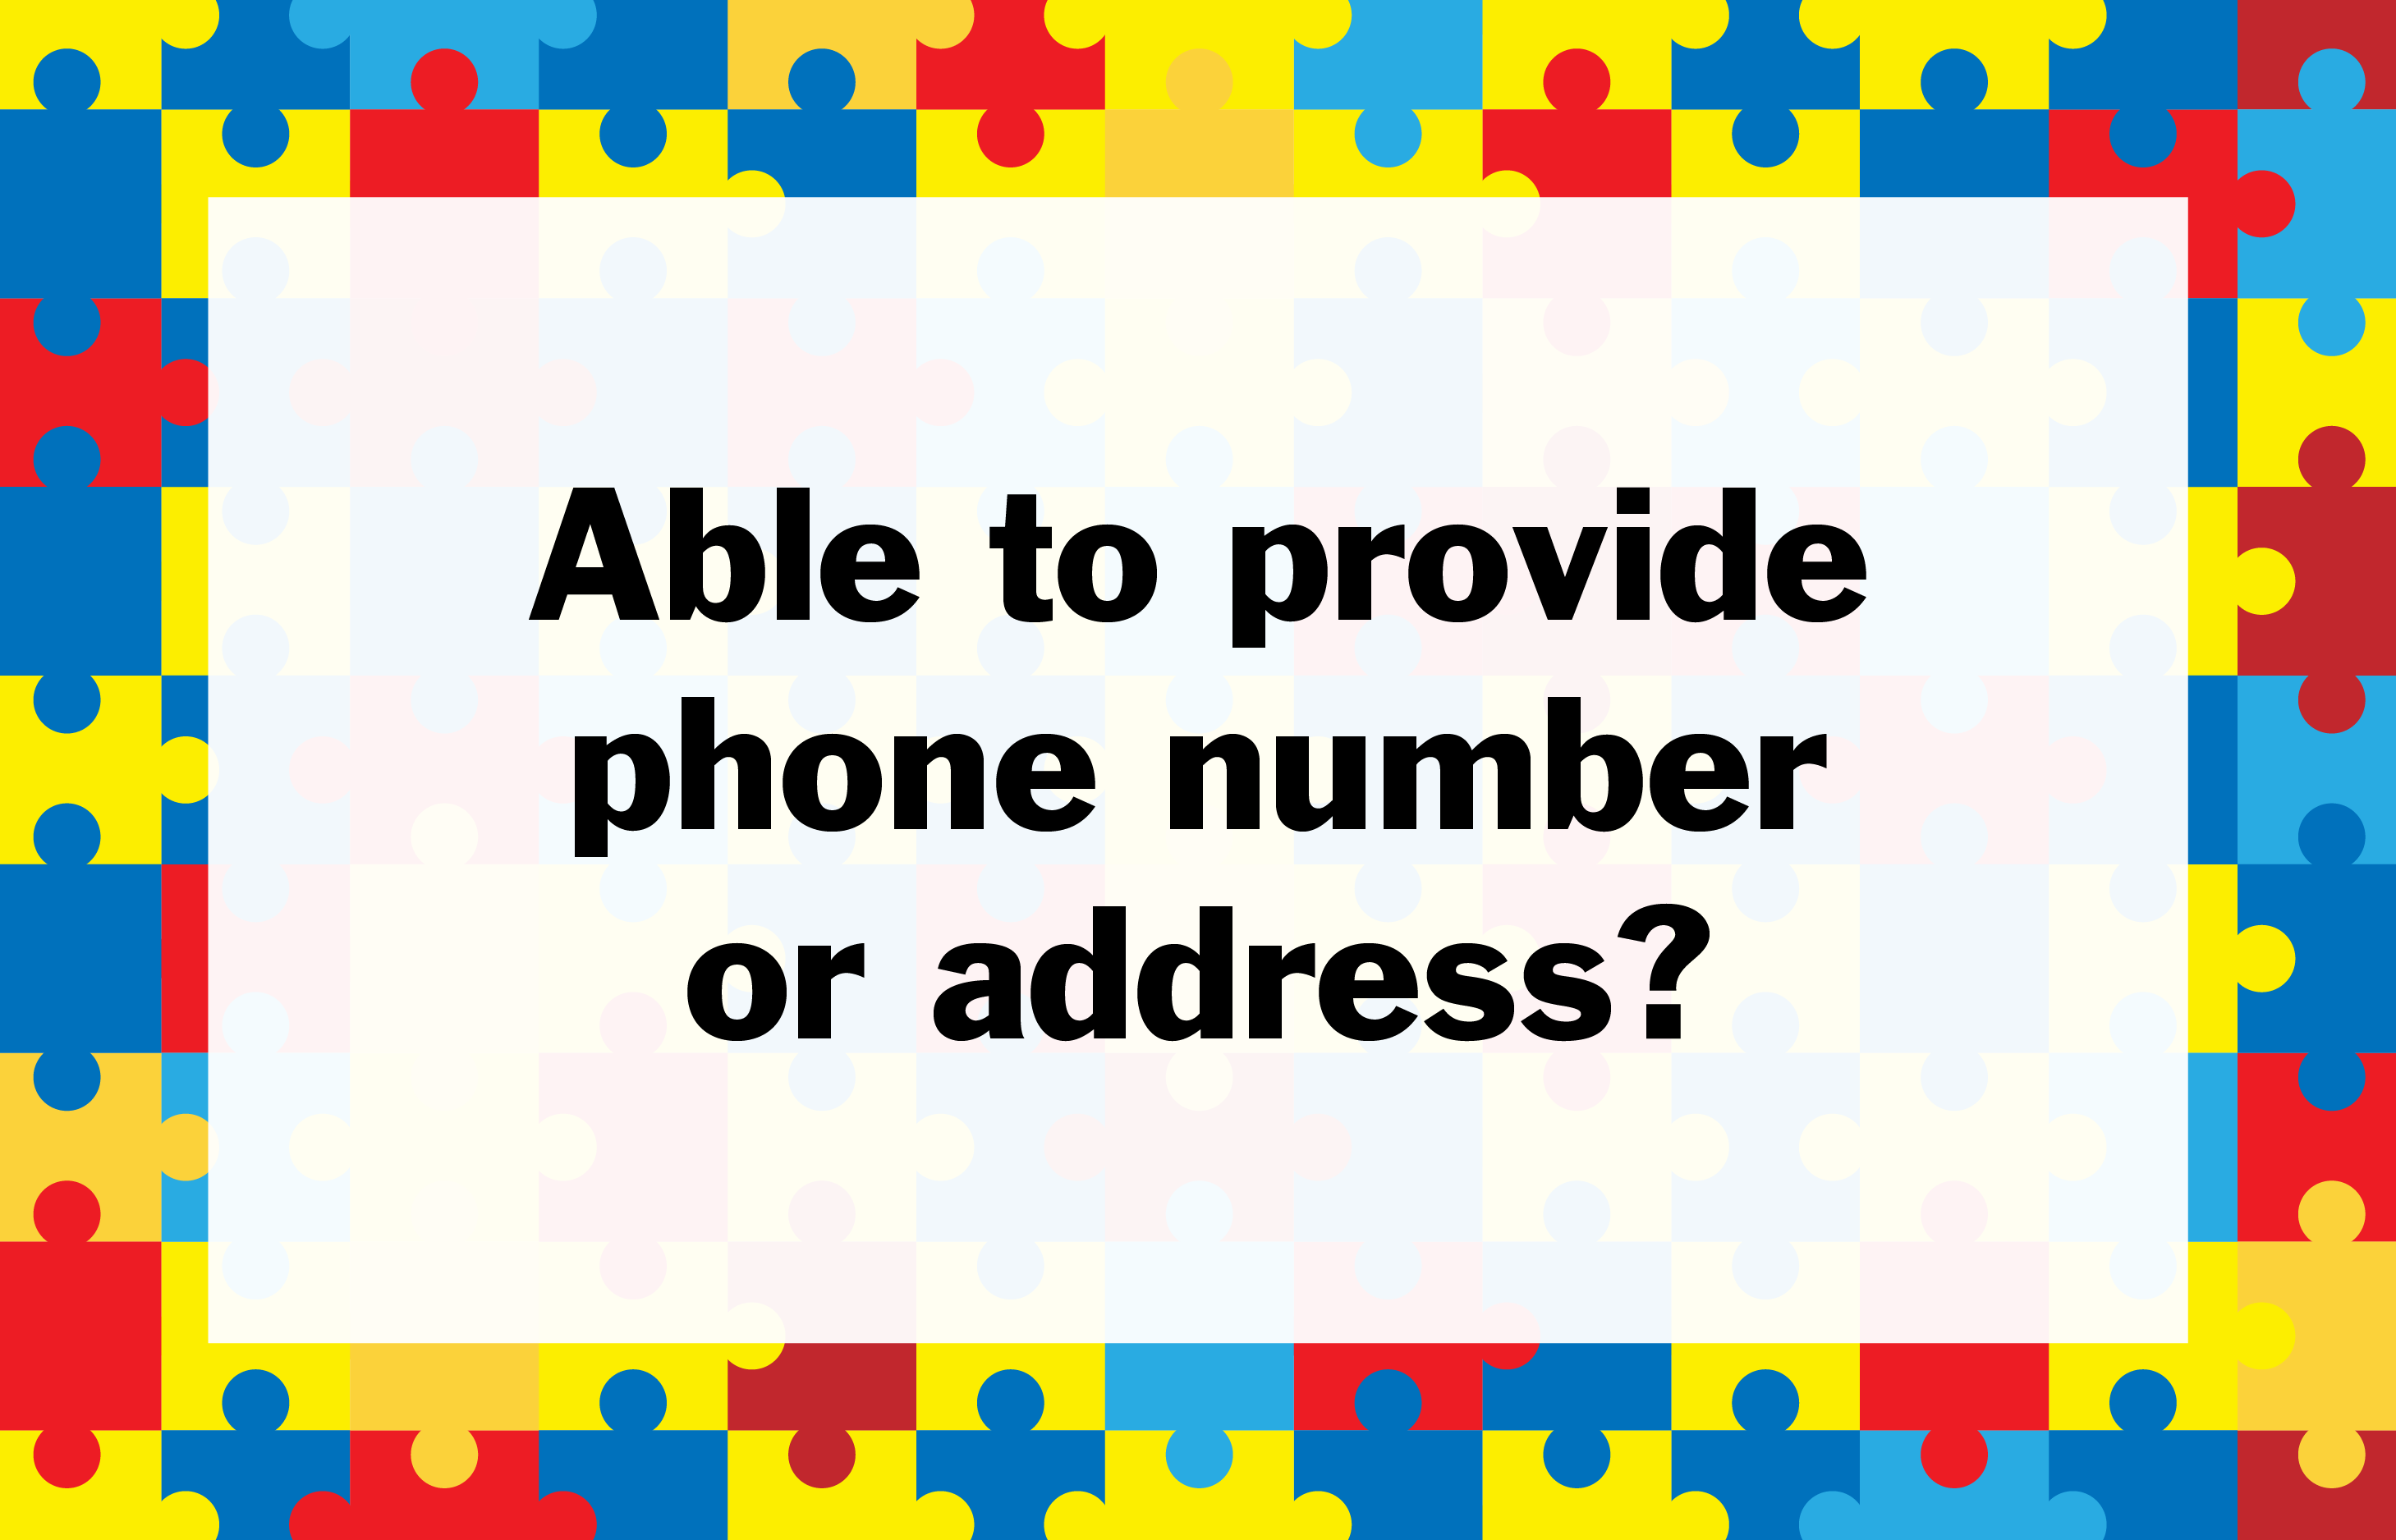 Able to provide phone number or address?